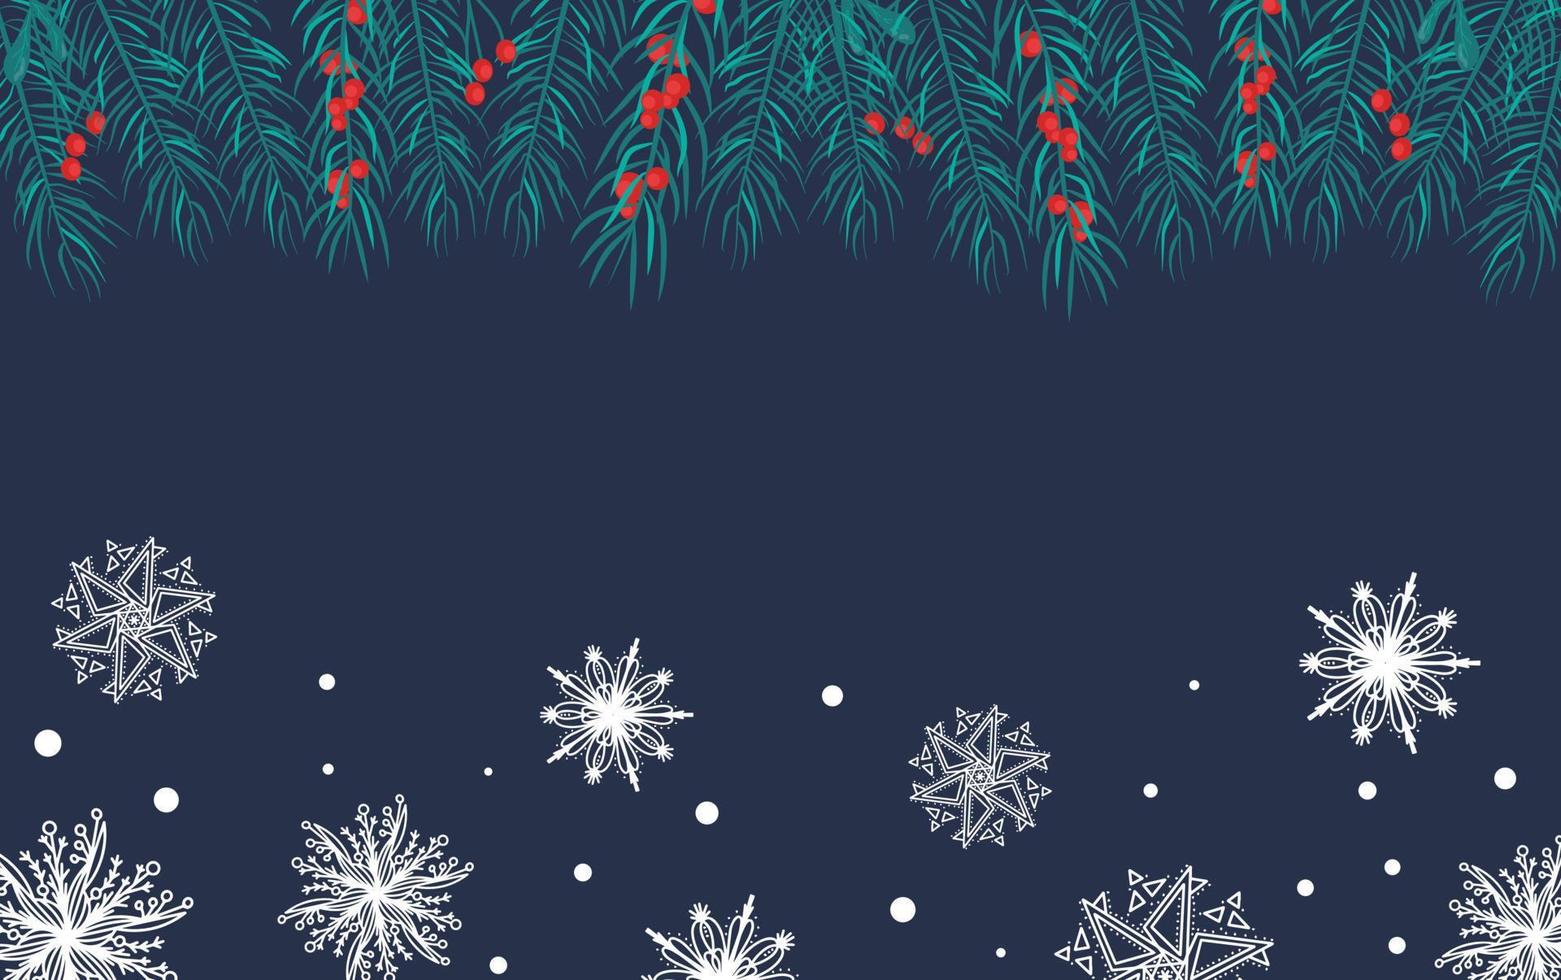 Beautiful background with white snowflakes and berry branches for winter design. Collection of Christmas New Year elements. Frozen silhouettes of crystal snowflakes. Modern design. Holiday wallpaper. vector